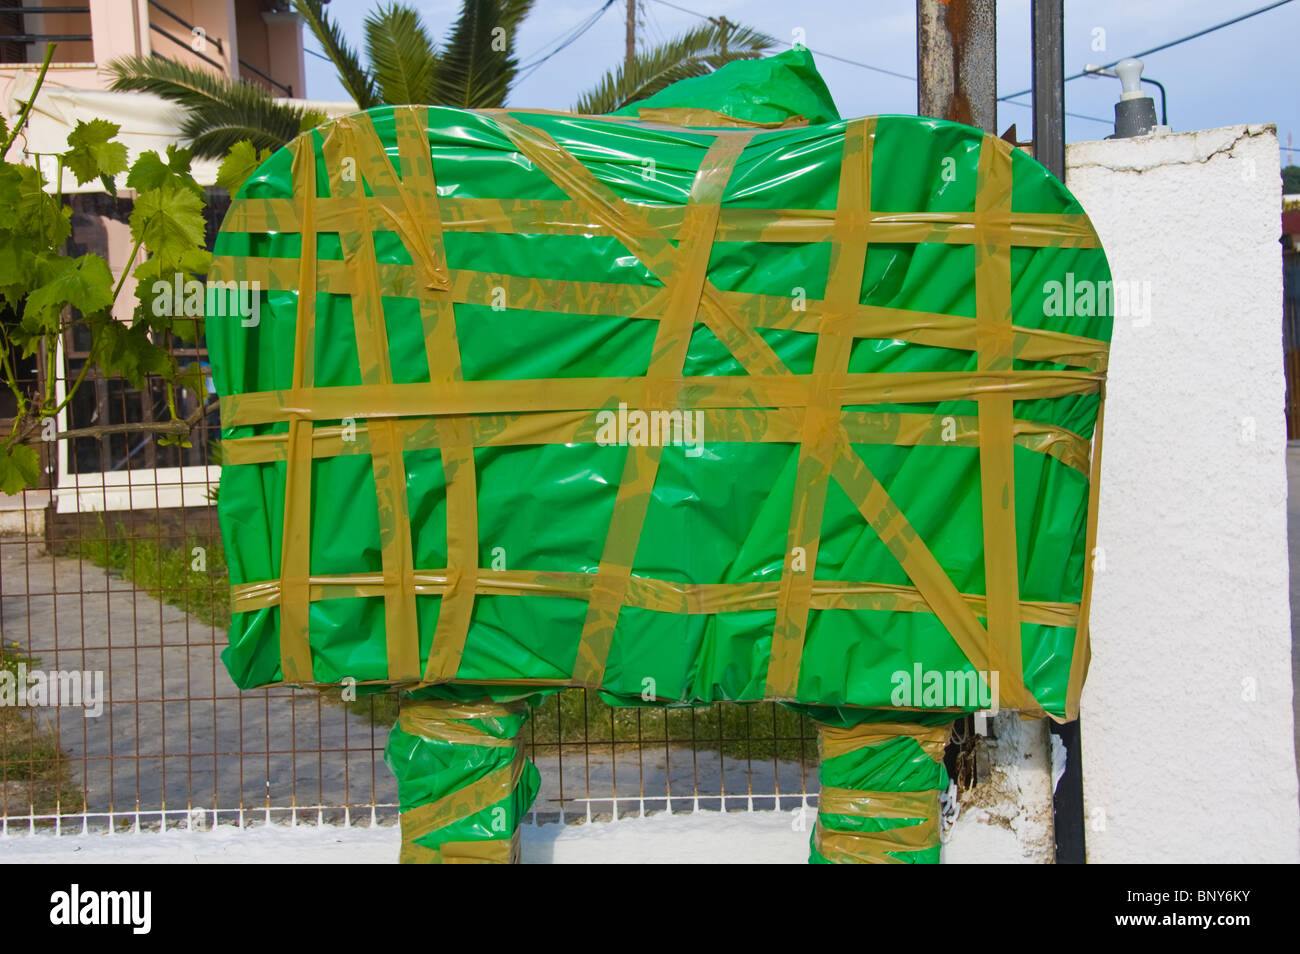 Out of season public telephones taped up covered in green plastic Sidari on the Greek island of Corfu Greece GR Stock Photo